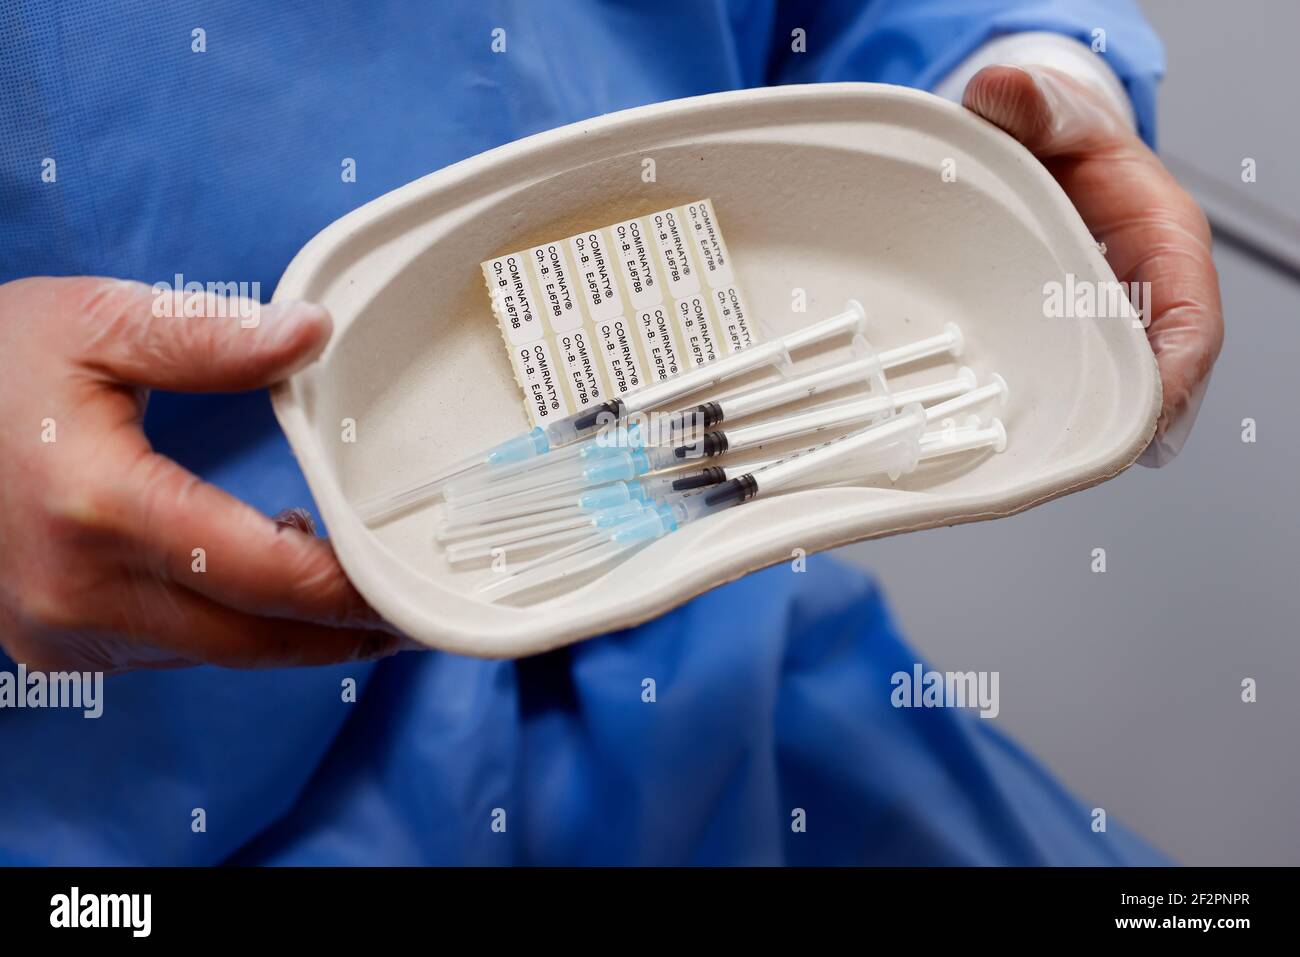 Essen, North Rhine-Westphalia, Germany - Vaccination start in the Corona Vaccination Center Essen, the vaccination syringes, BioNTech-Pfizer vaccine, 6 vaccination doses are drawn from an ampoule onto vaccination syringes. Stock Photo